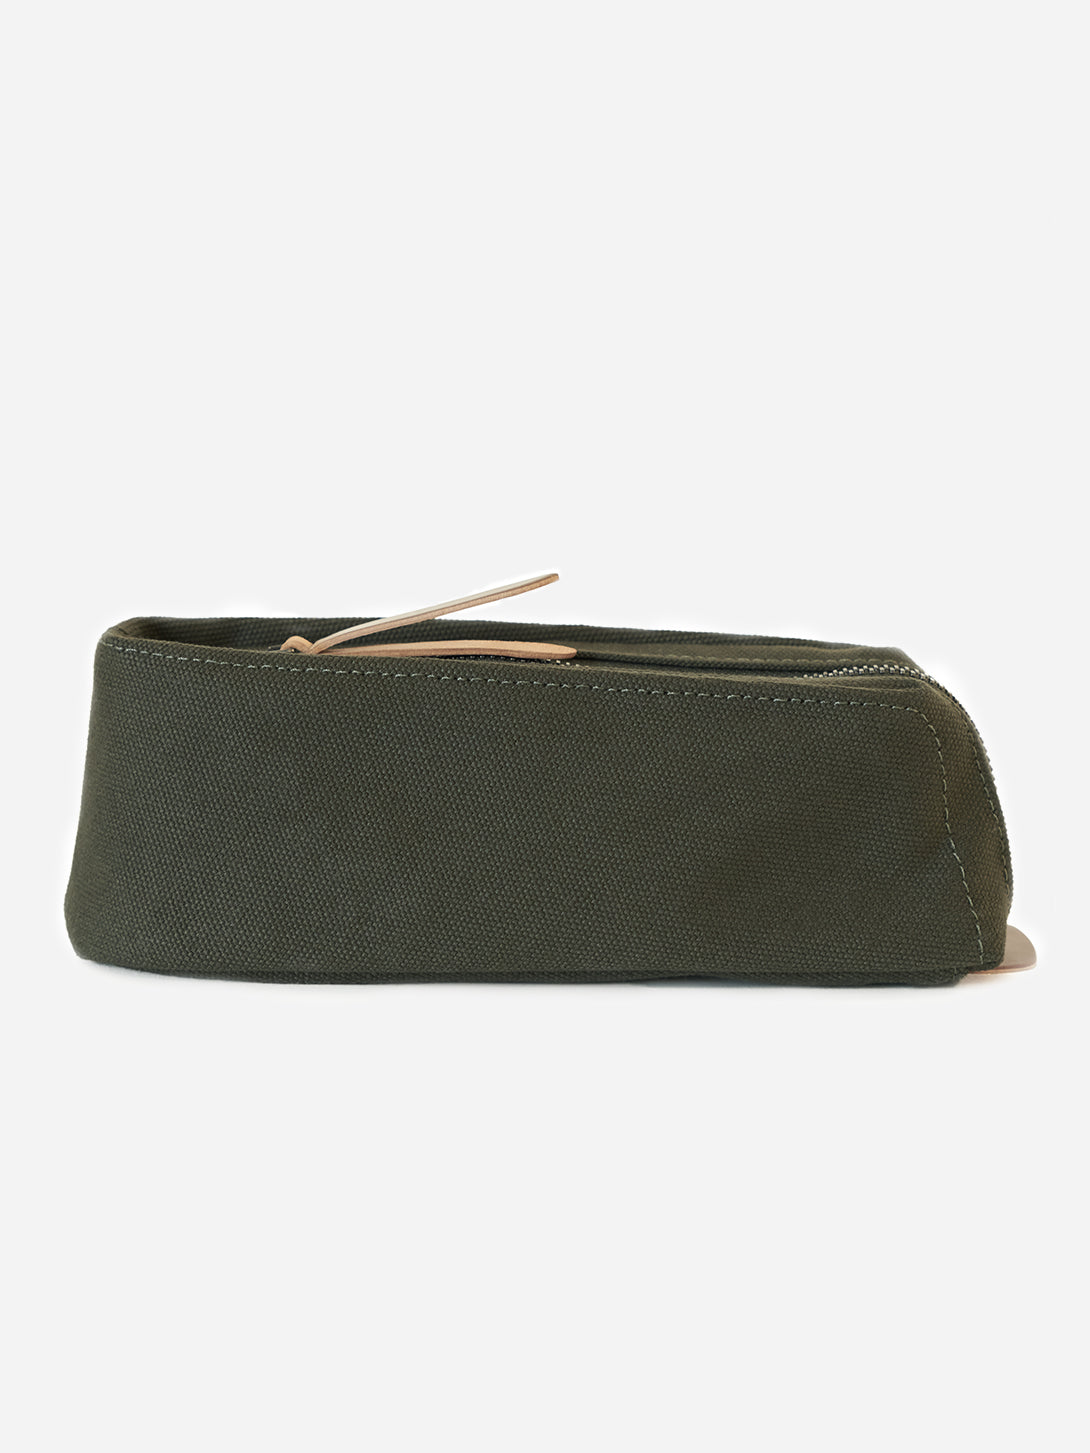 ARMY GREEN canvas pencil and pen case Makr